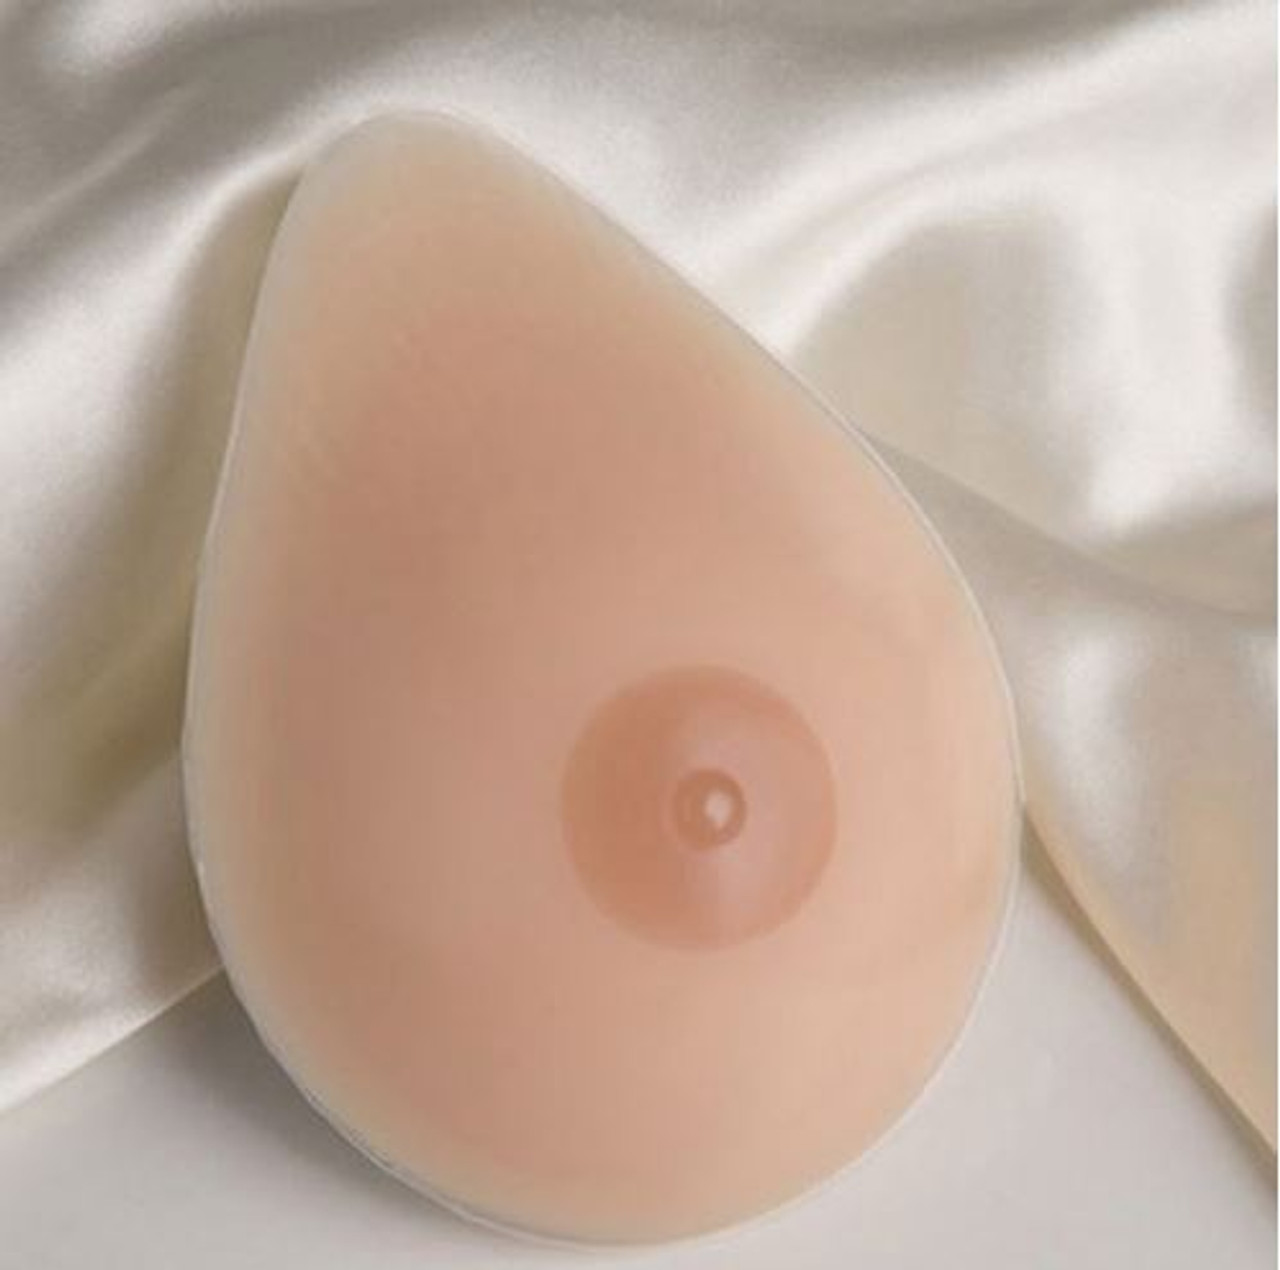 Standard Full Triangle Breast Forms - sold in Pairs- For Double Mastectomy